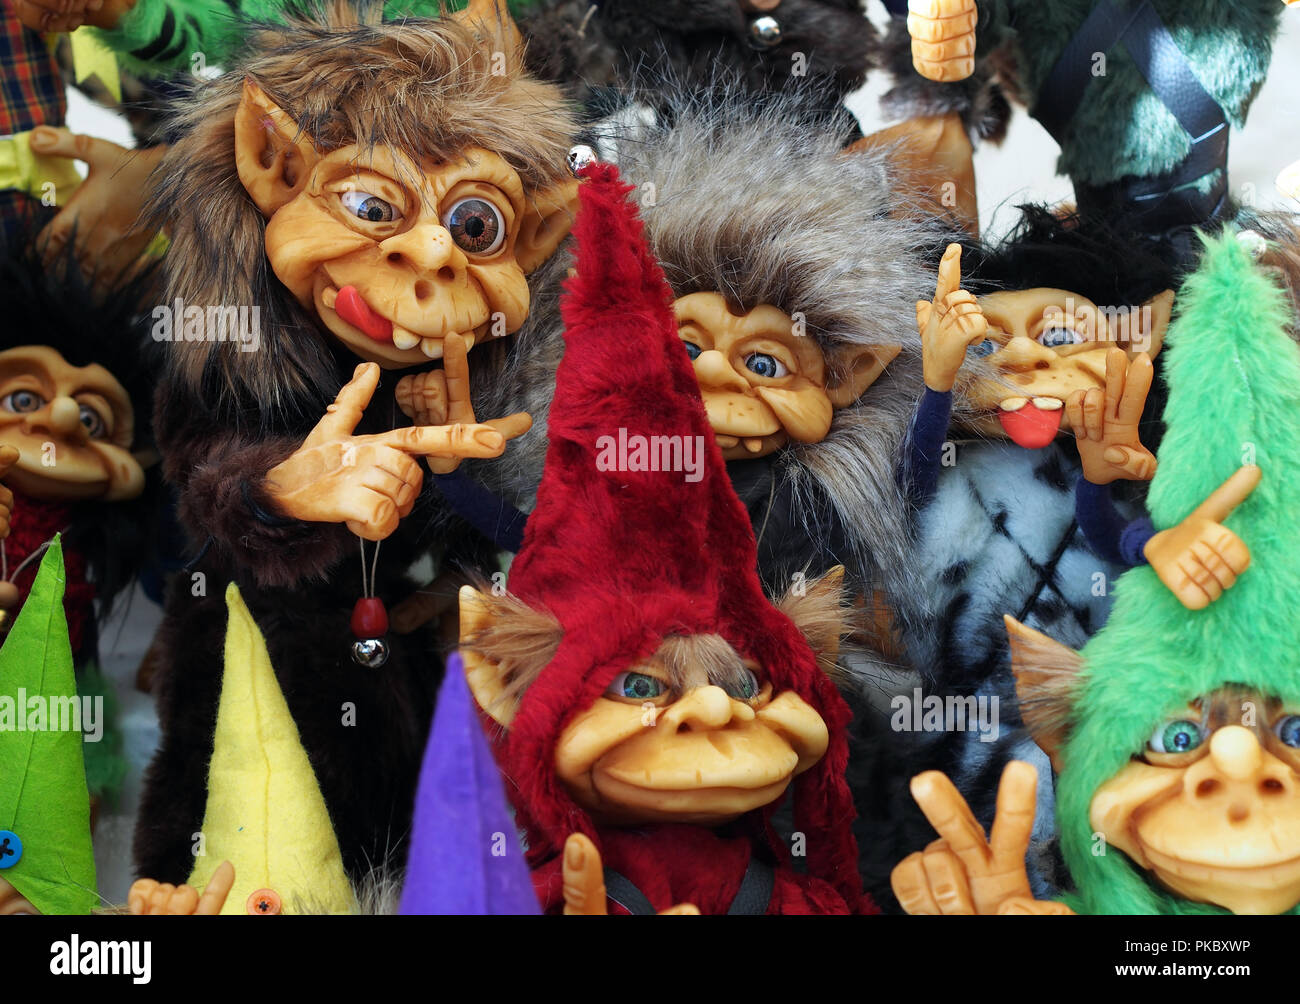 A bunch of different colorful little cute trolls Stock Photo